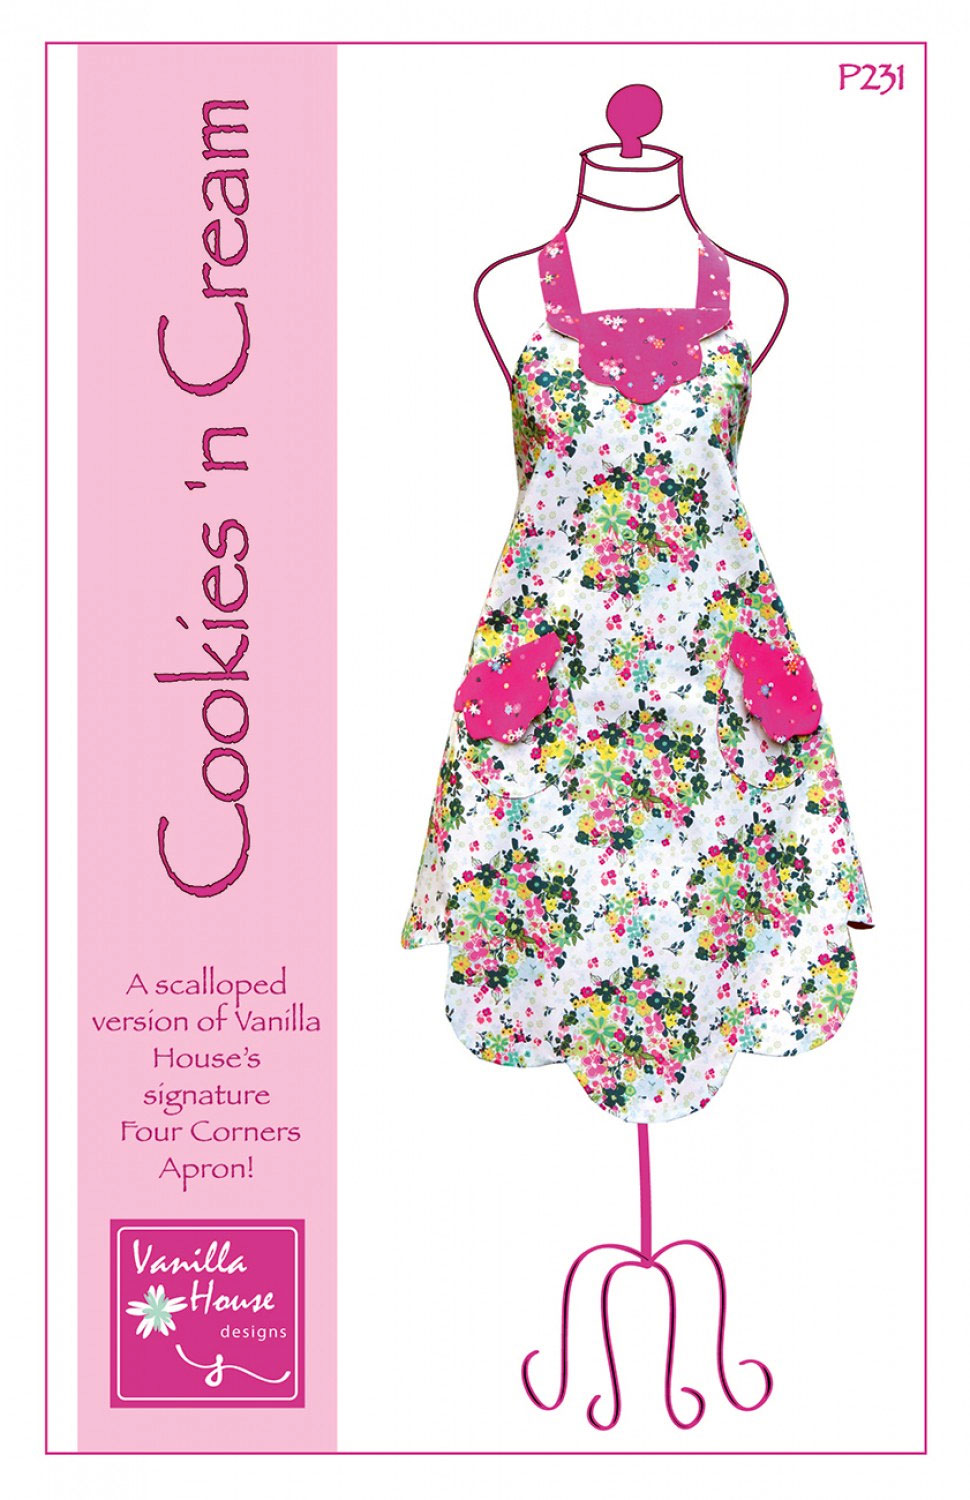 Cookies-n-cream-apron-sewing-pattern-Vanilla-House-Designs-front